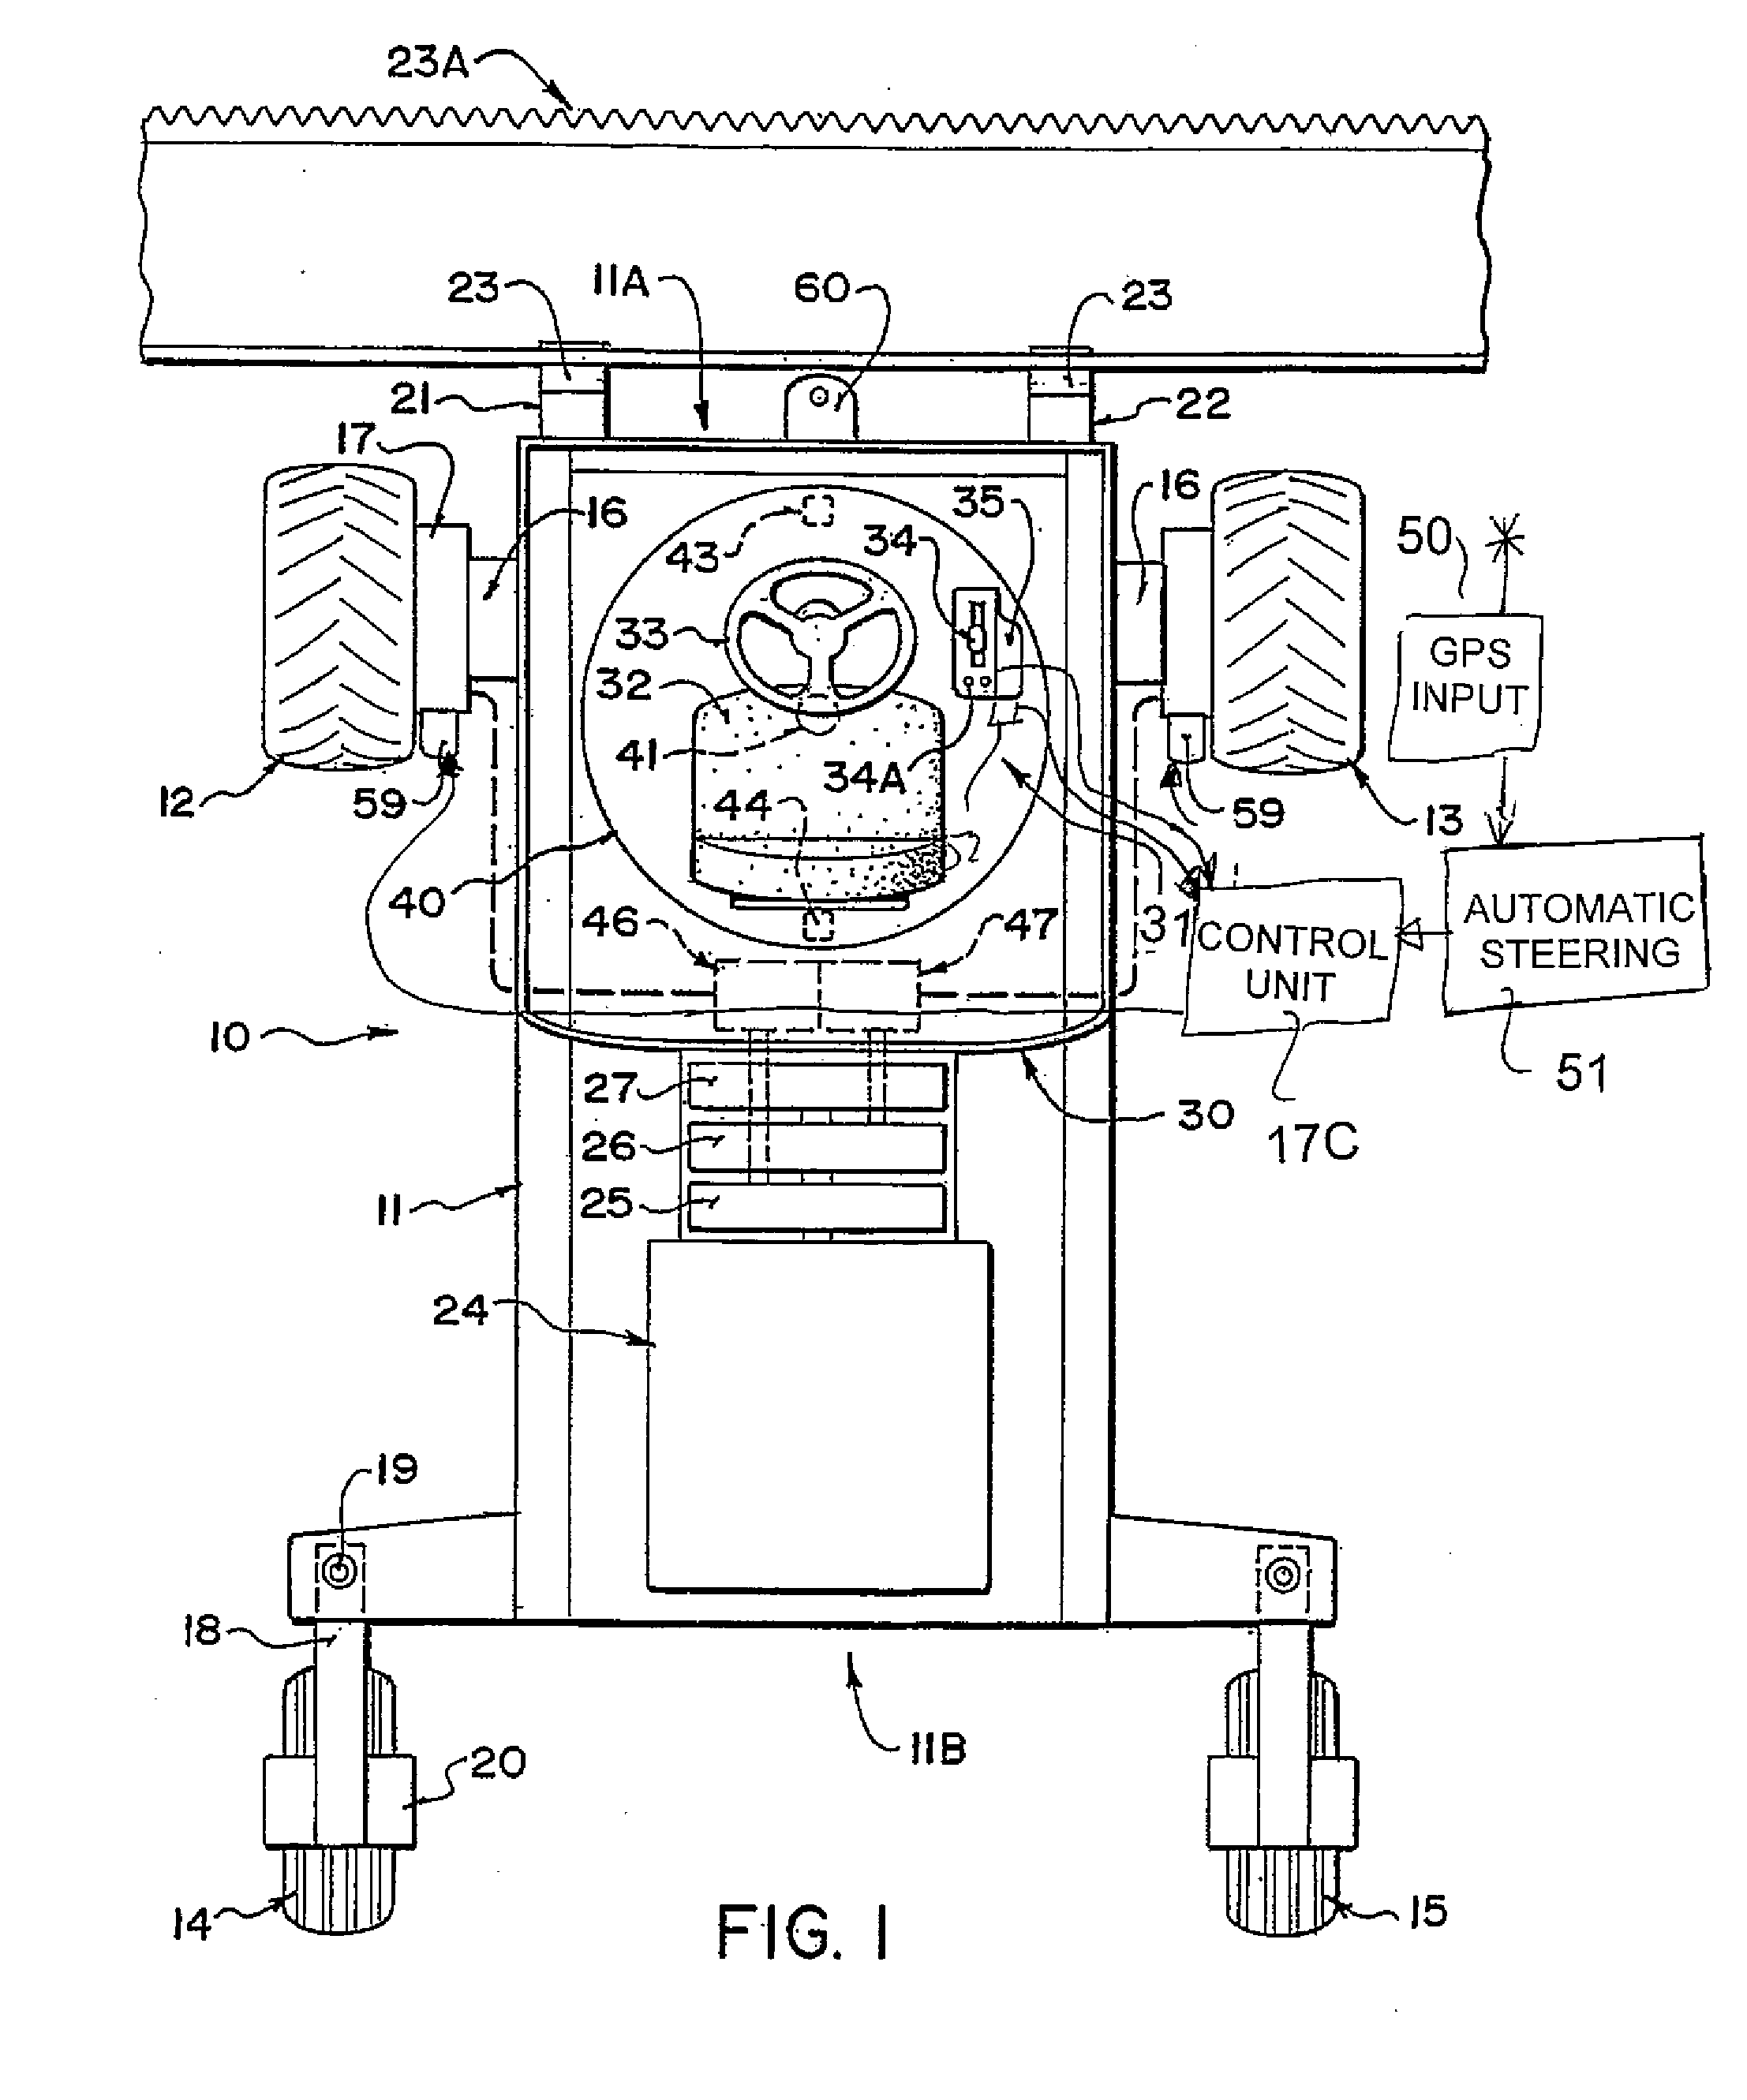 Speed and Steering Control of a Hydraulically Driven Tractor